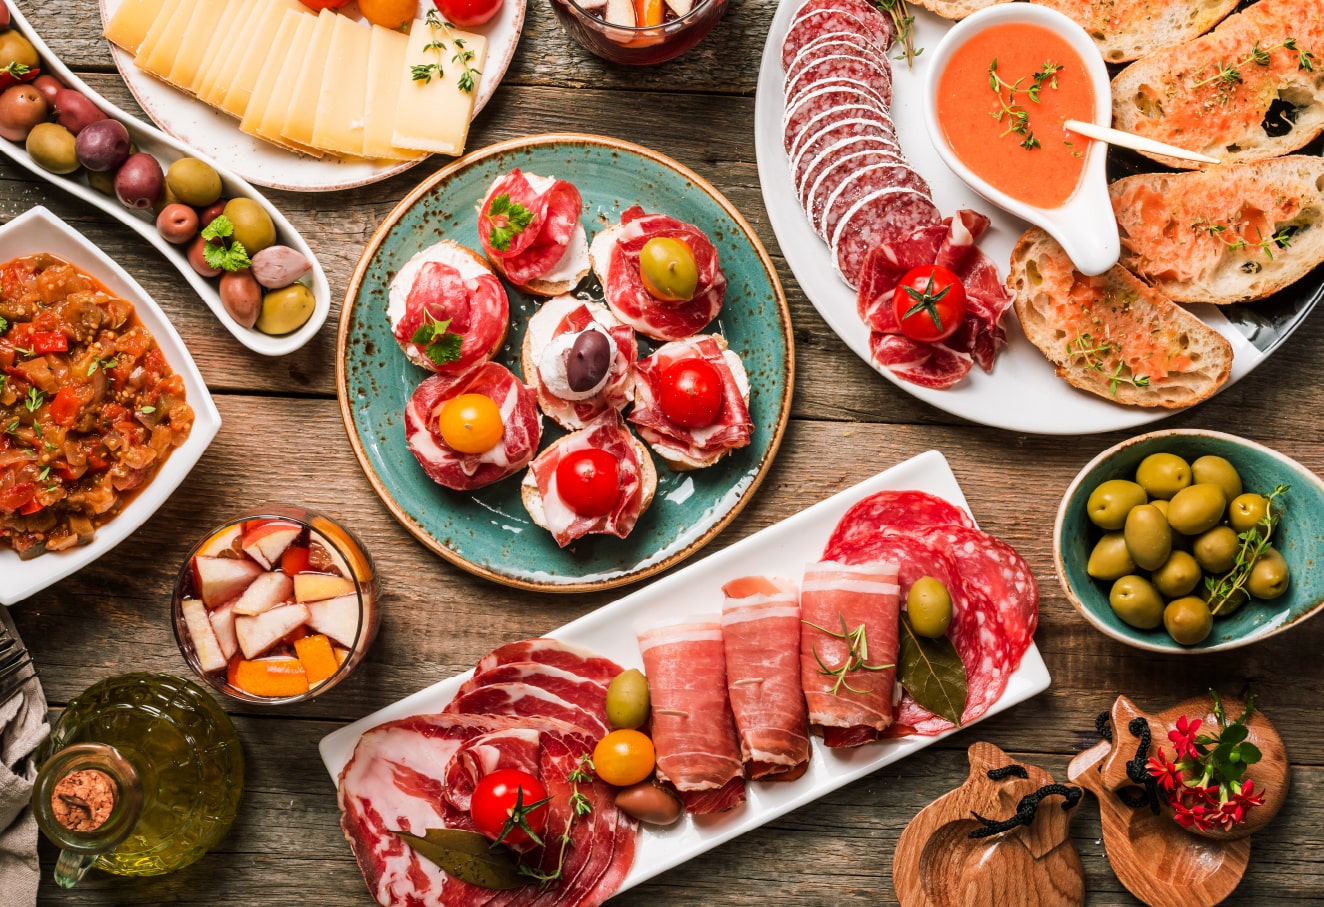 A vairety of cold cuts and tapas dishes with a glass of sangria are on the table.